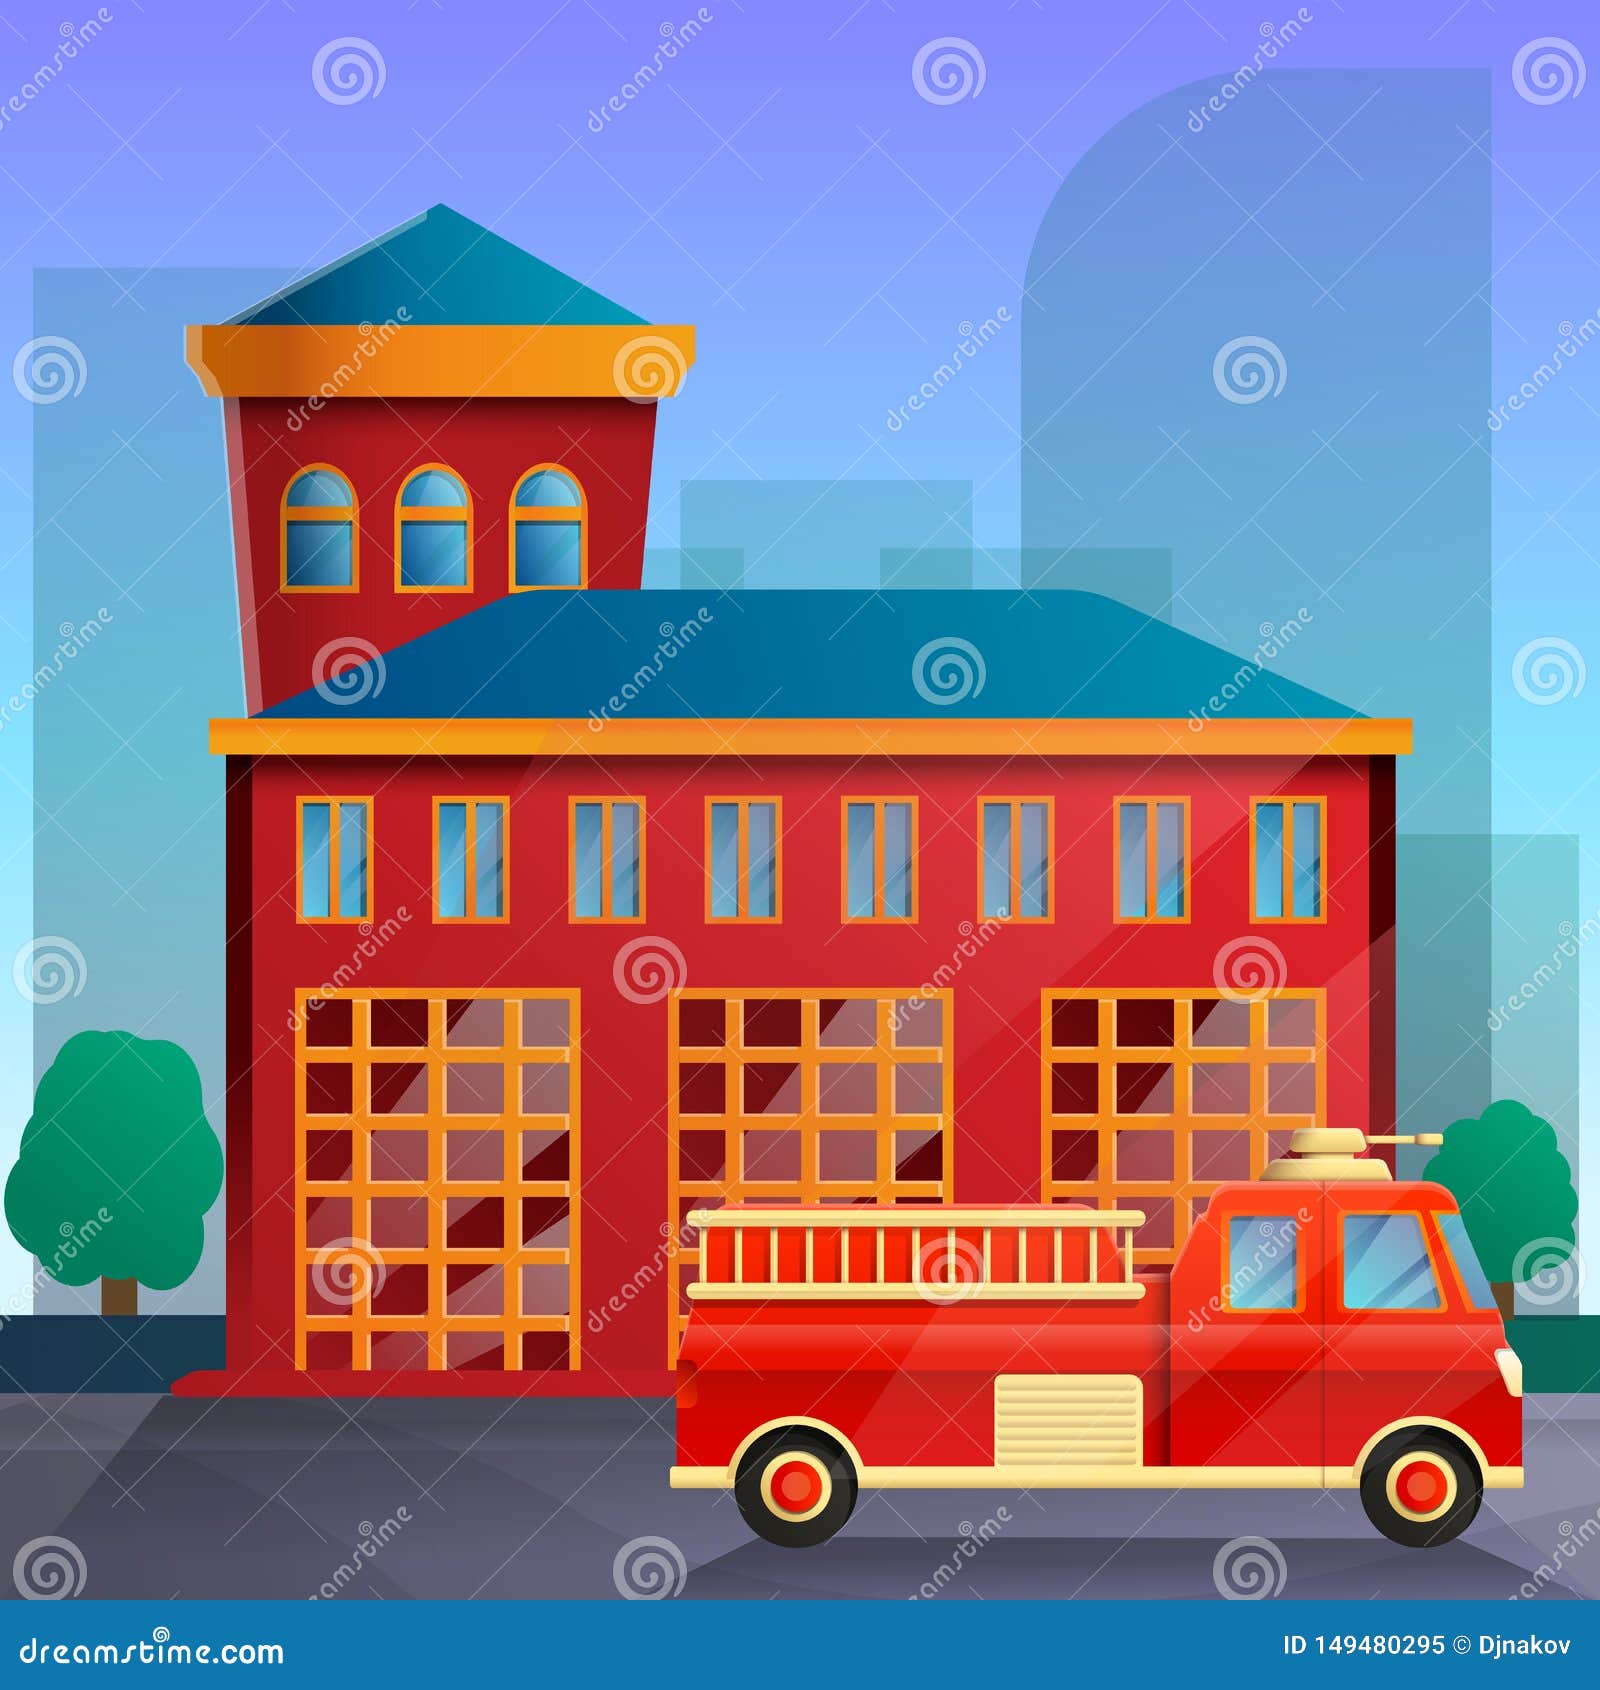 Fire Station Cartoon Background Stock Illustrations – 479 Fire Station